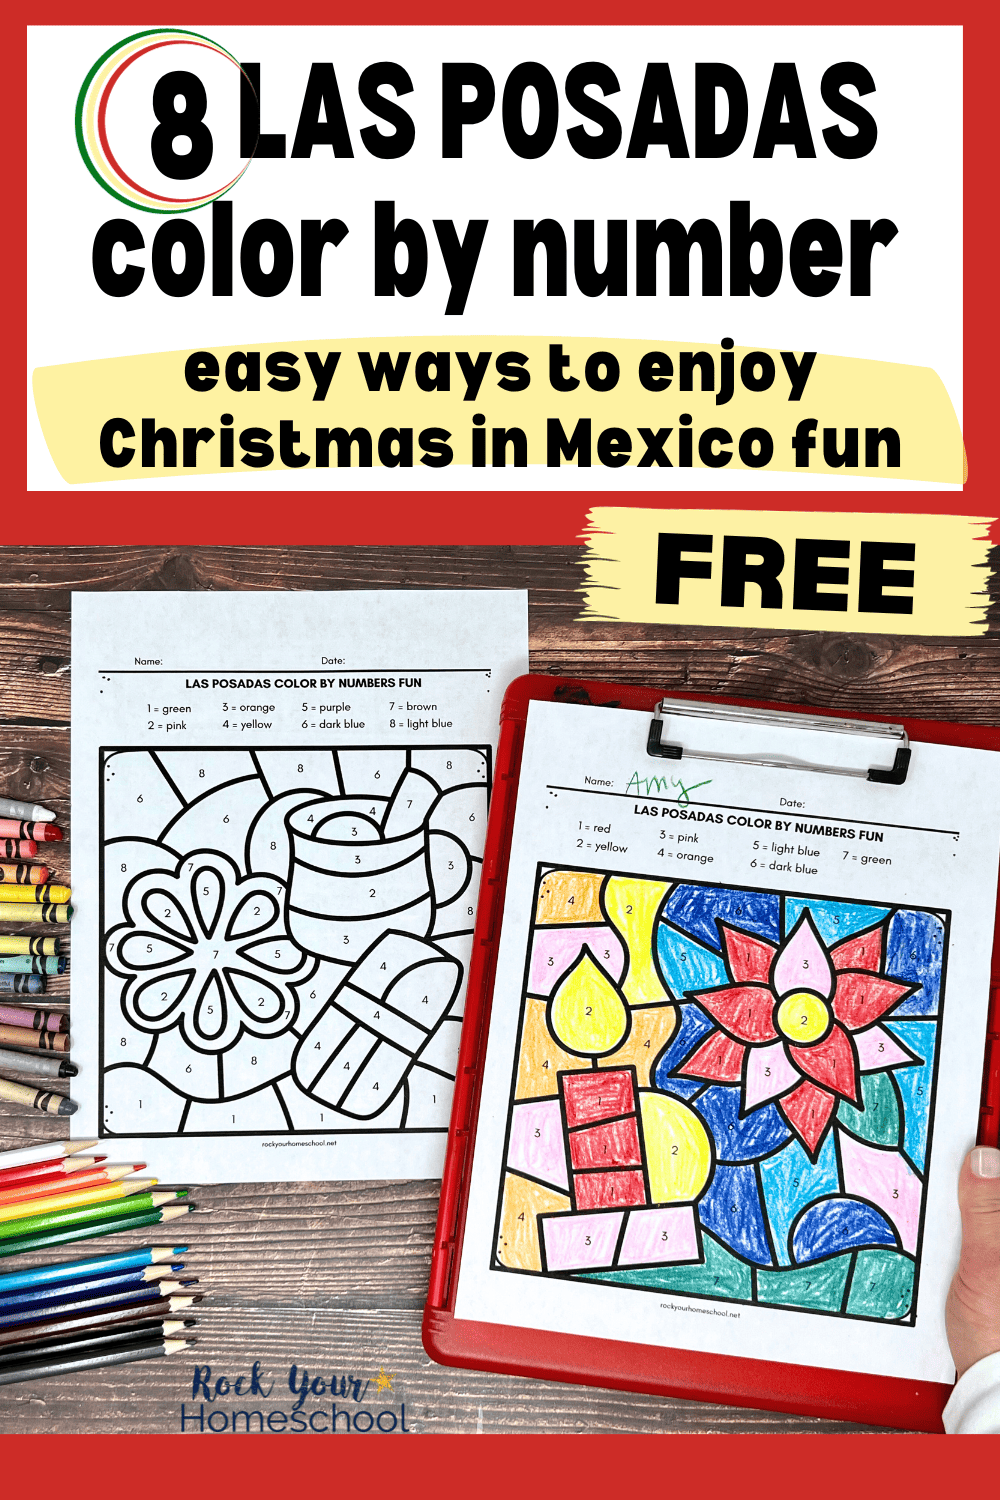 Las Posadas Color by Number Pages for Christmas in Mexico Fun (Free)